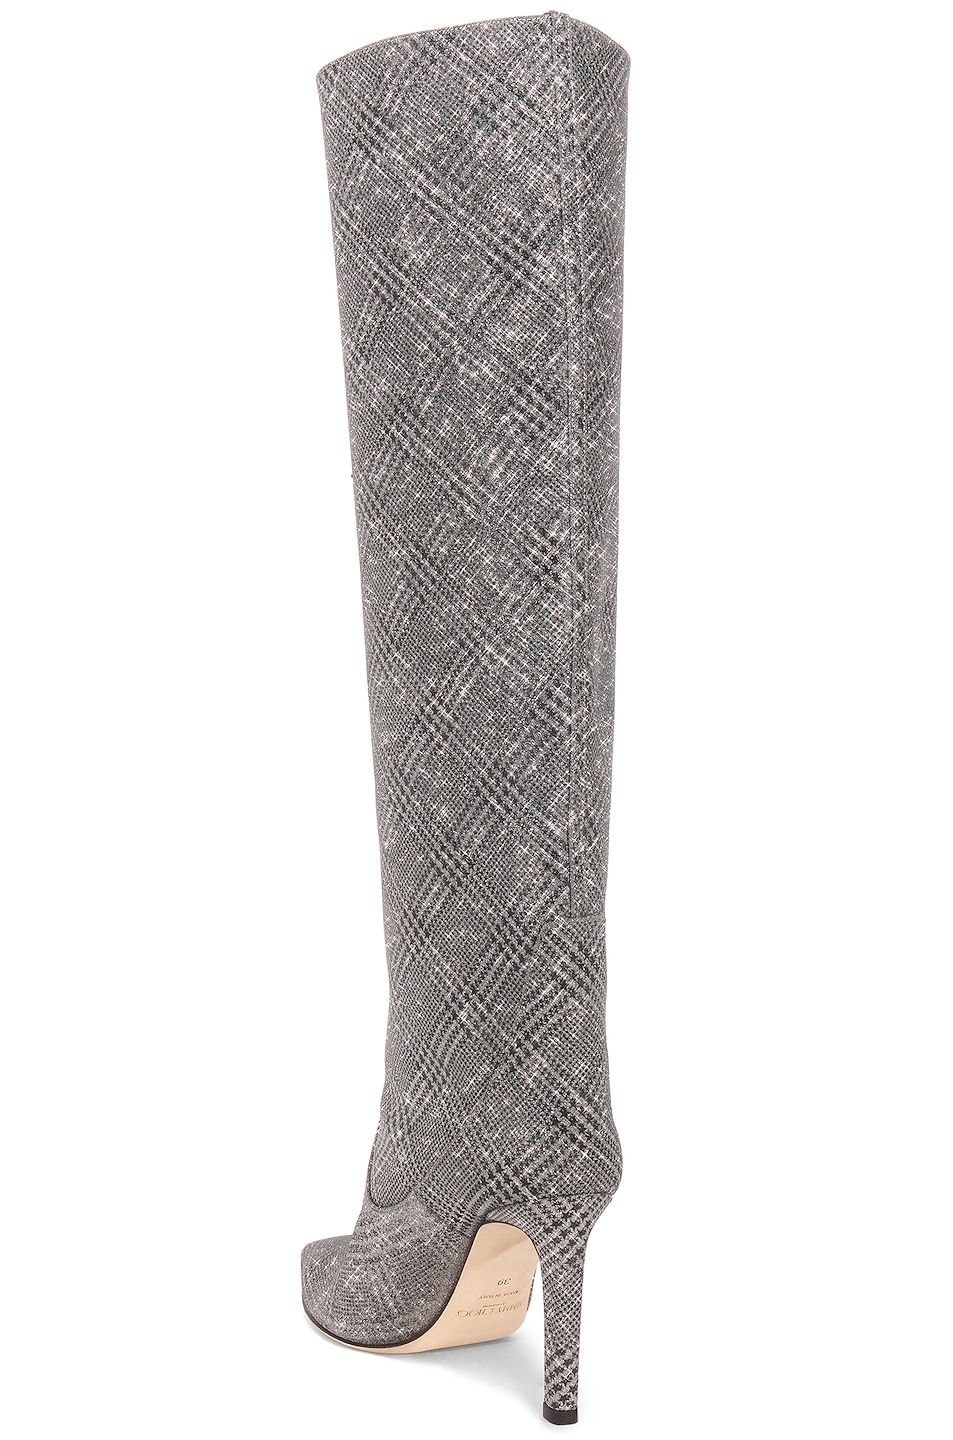 jimmy choo sparkle boots